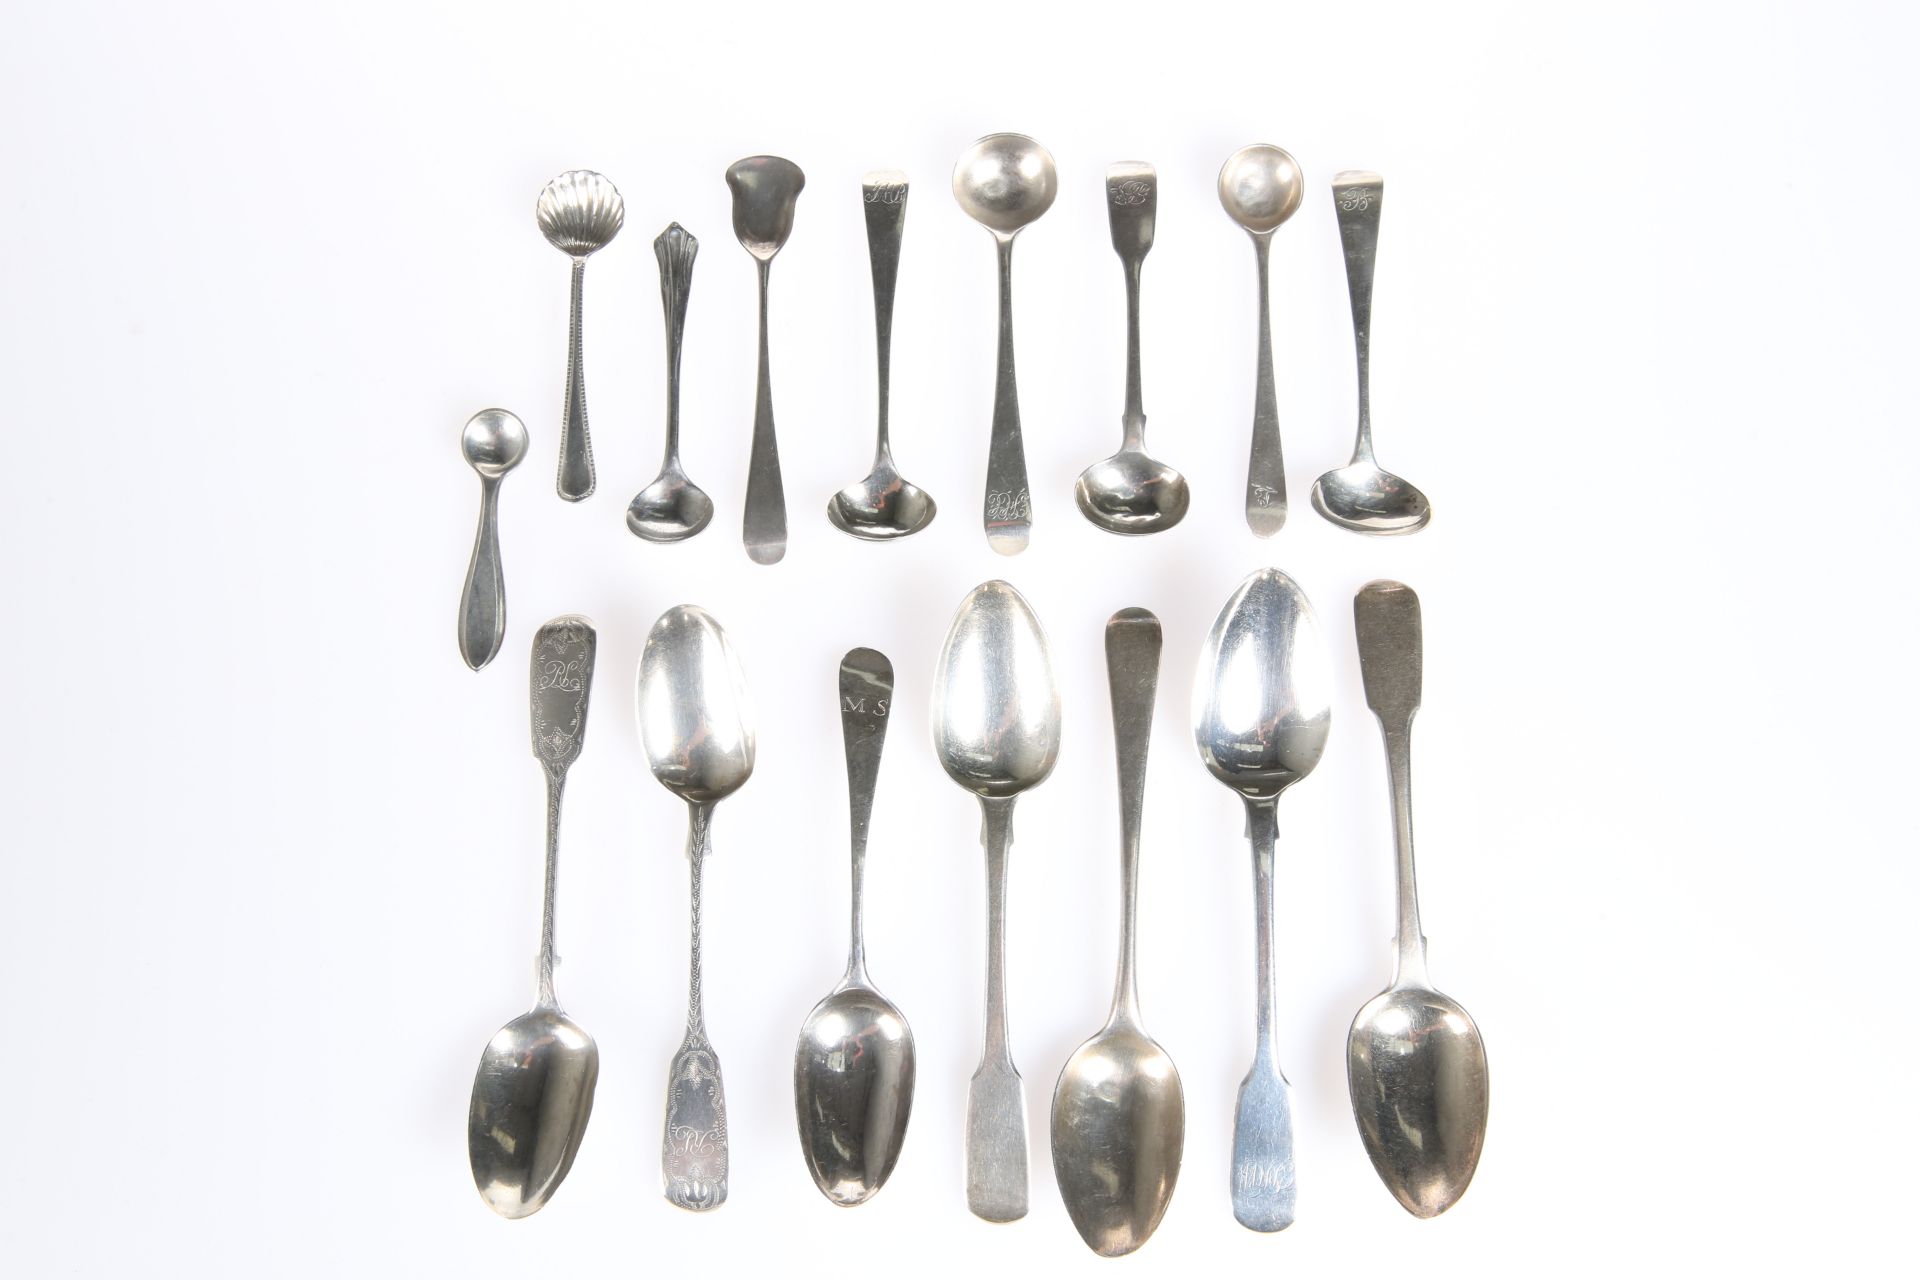 SEVEN ASSORTED GEORGIAN AND VICTORIAN SILVER TEASPOONS, of typical form, 14cm longest; sold together